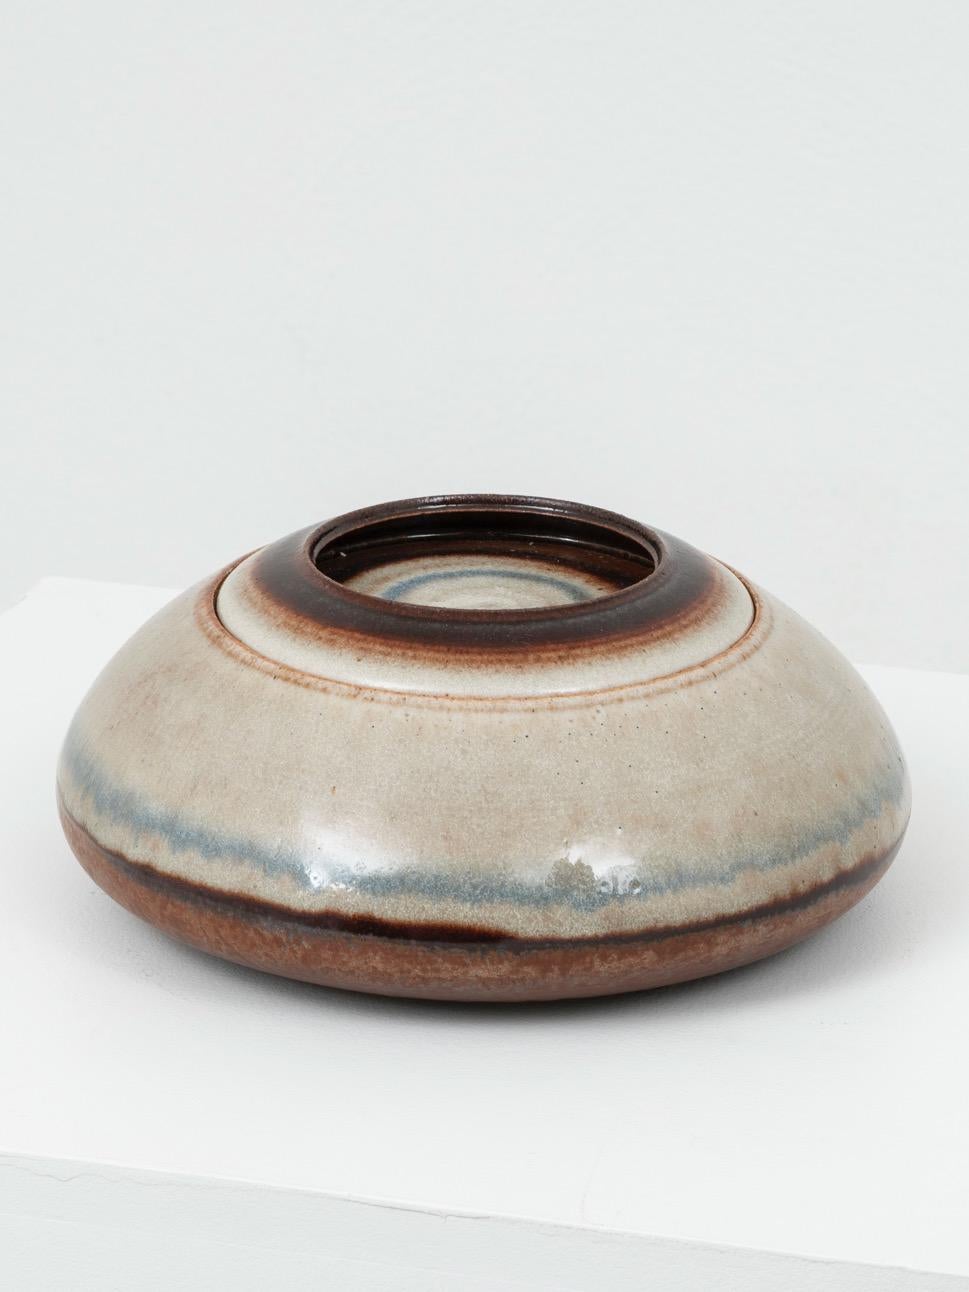 Beautiful ceramic box produced in the 1970s a small series by Ceramica Arcore, crafted by Marco Terenzi and finished by Nanni Valentini, featuring an abstract organic decor in earthly and sky tones. It has a tactile finishing, alternating a smooth